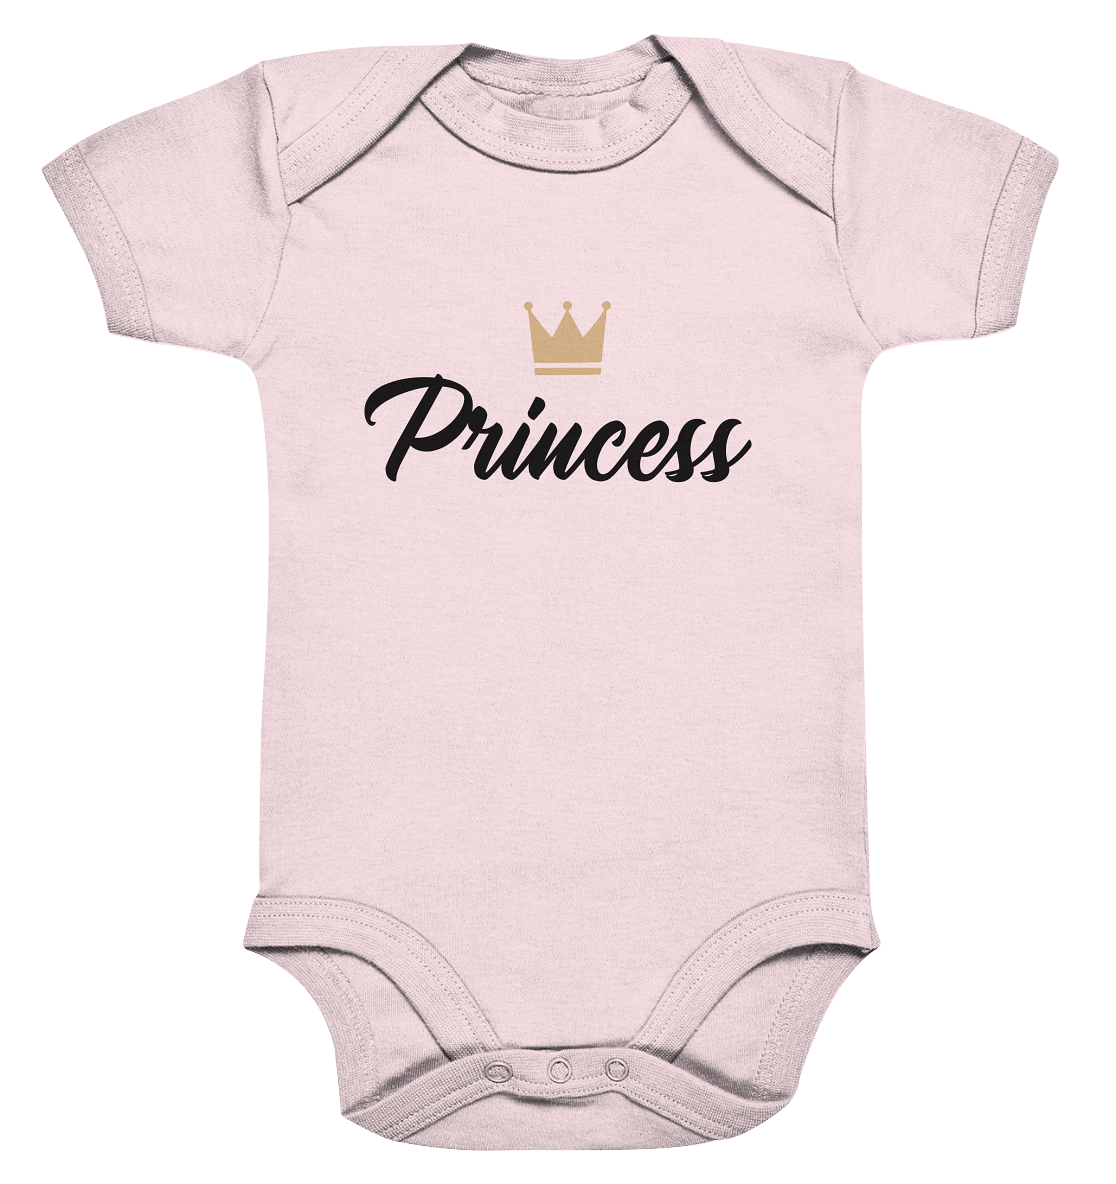 Princess Baby Bodysuite Familienoutfit King, Queen und Princess Bloominic in zart rosa